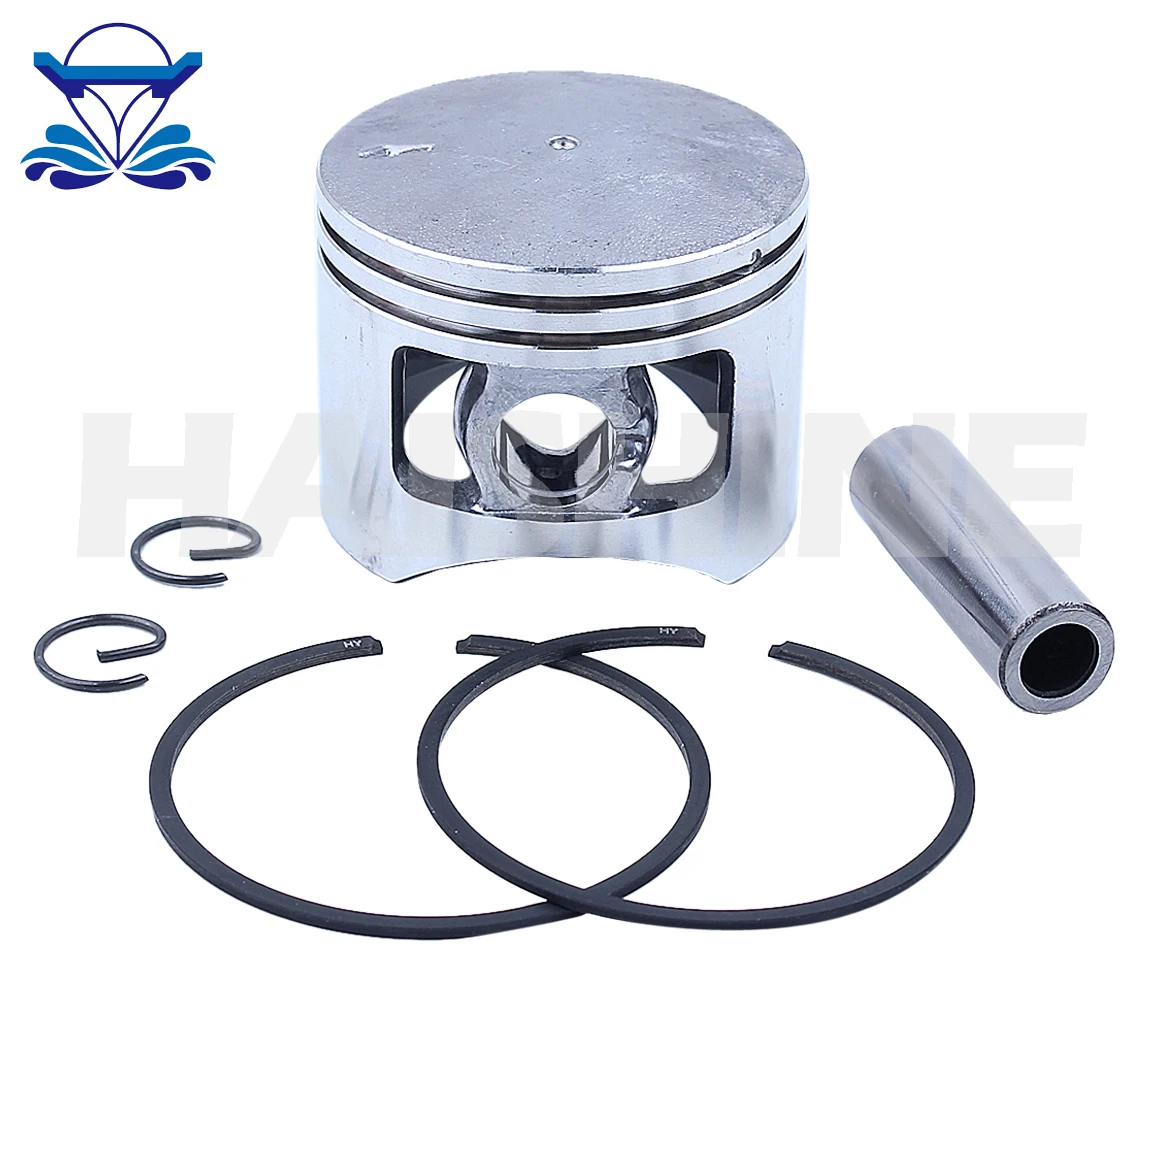 45mm Piston & Pin & Circlip & Ring Kits Fit for Chinese 4500 5200 5800 45cc 52cc 58cc Chainsaw